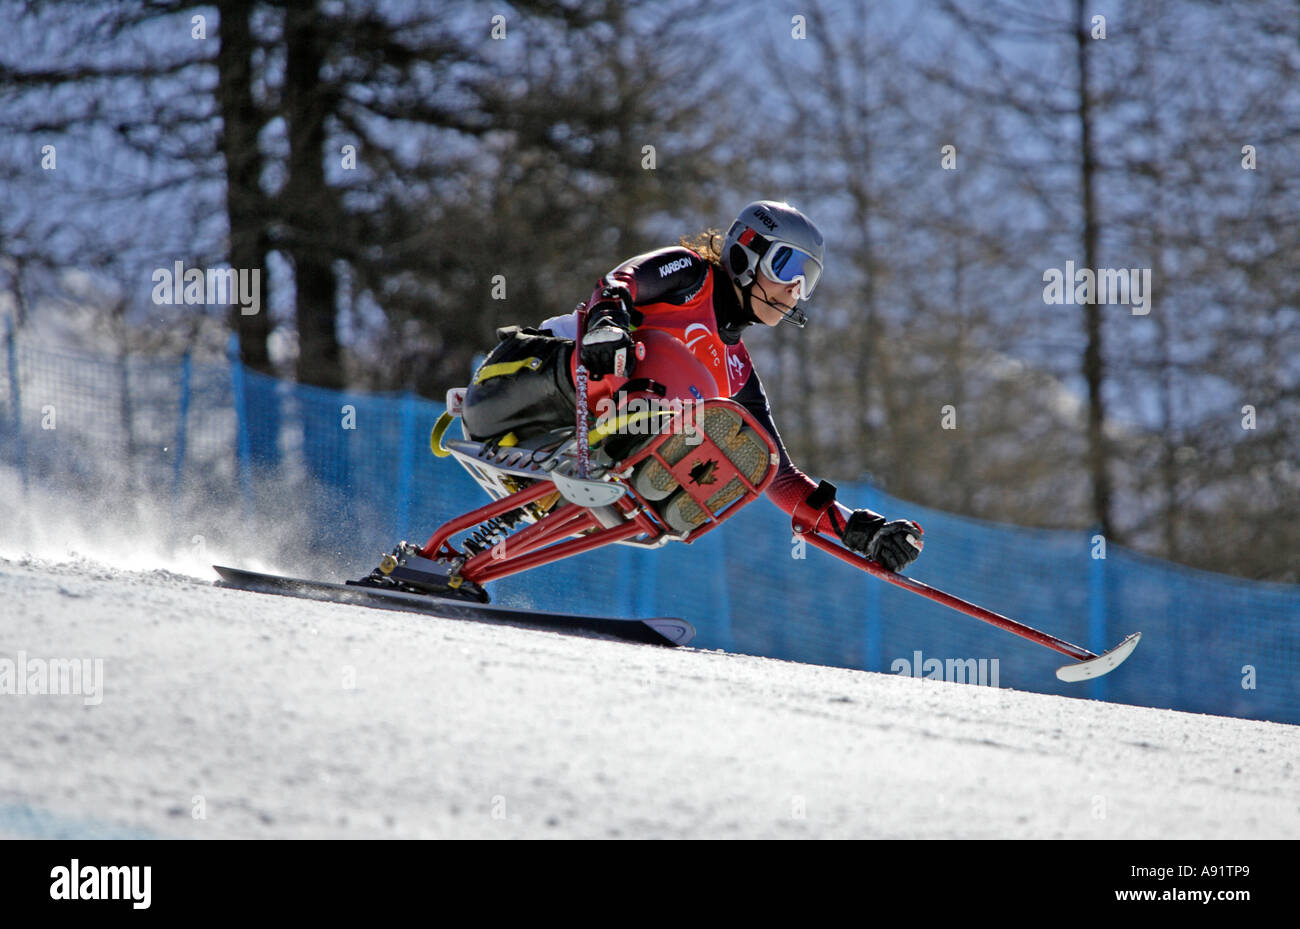 Kimberley Joines LW12 1 of Canada in the Womens Alpine Skiing Super G Sitting competition on her way to winning the bronze medal Stock Photo